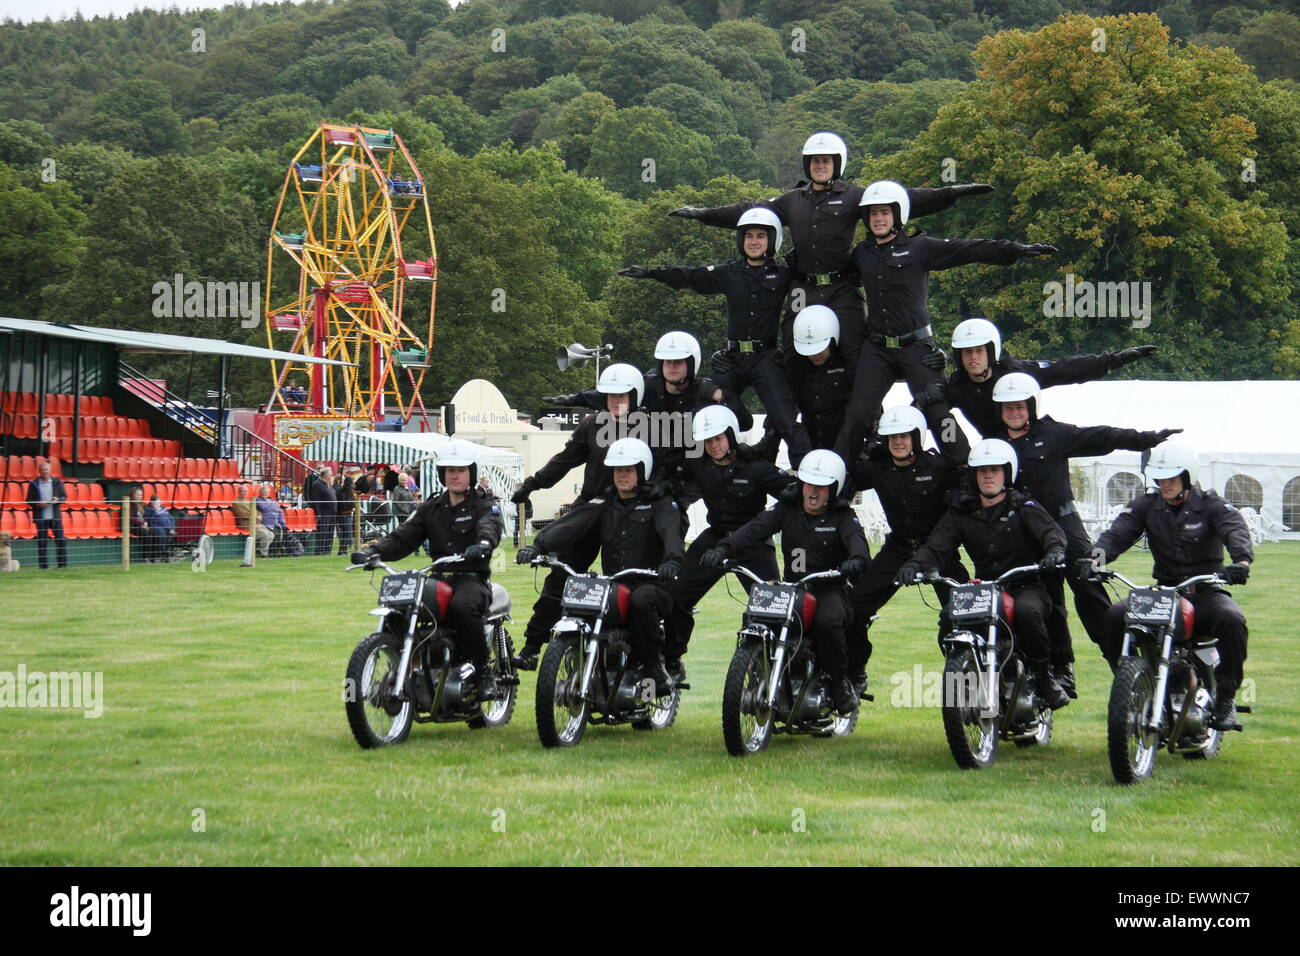 The Royal Signals White Helmets Motorcylcle display team perform at Chatsworth Country Fair, Peak District Derbyshire England UK Stock Photo